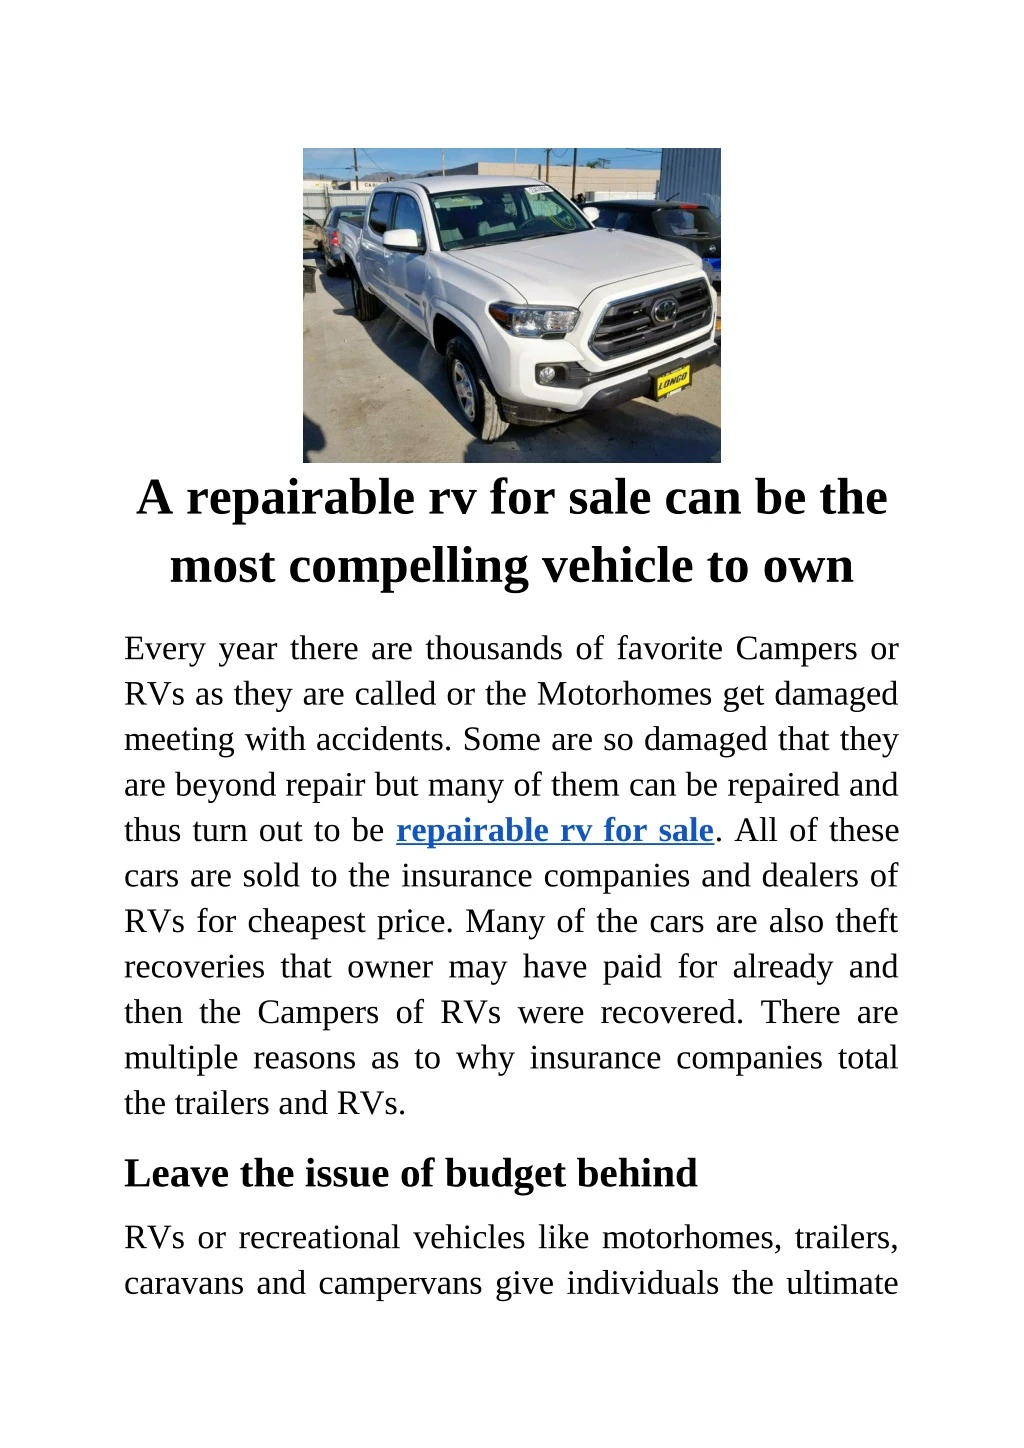 a repairable rv for sale can be the most